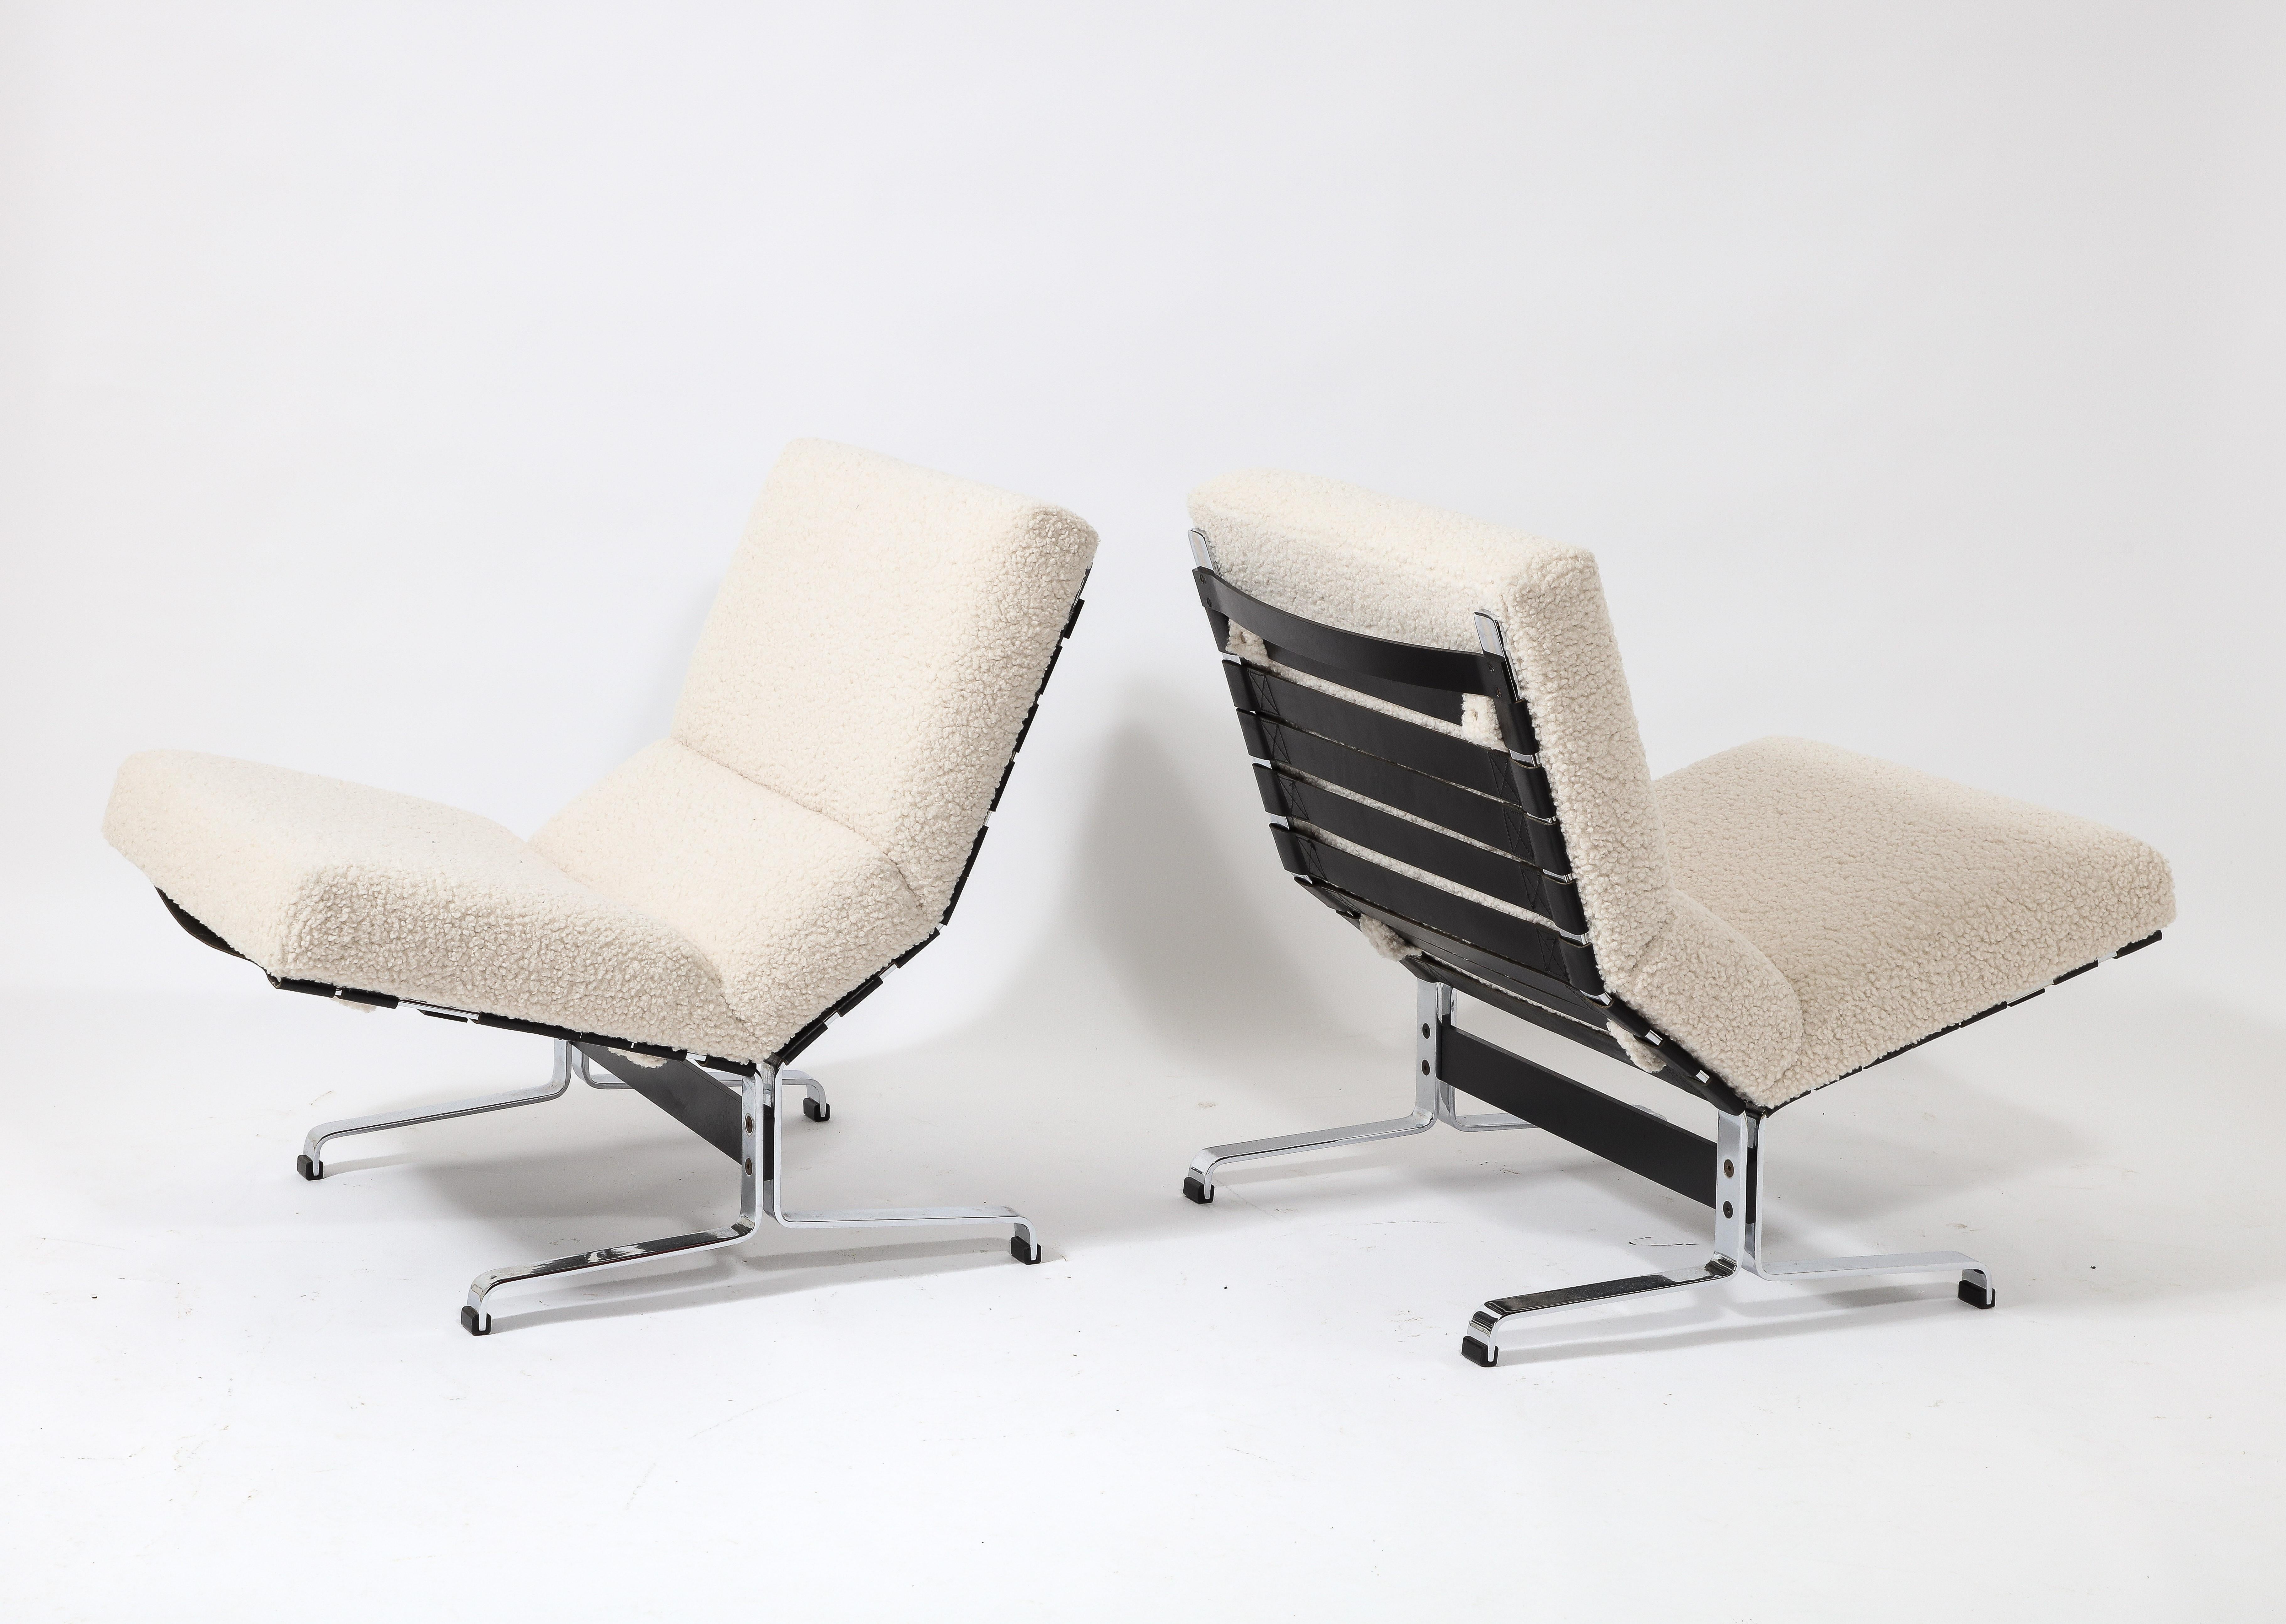 Etienne Fermigier Pair of Slipper Lounge Chairs in Cream, France 1960's For Sale 2